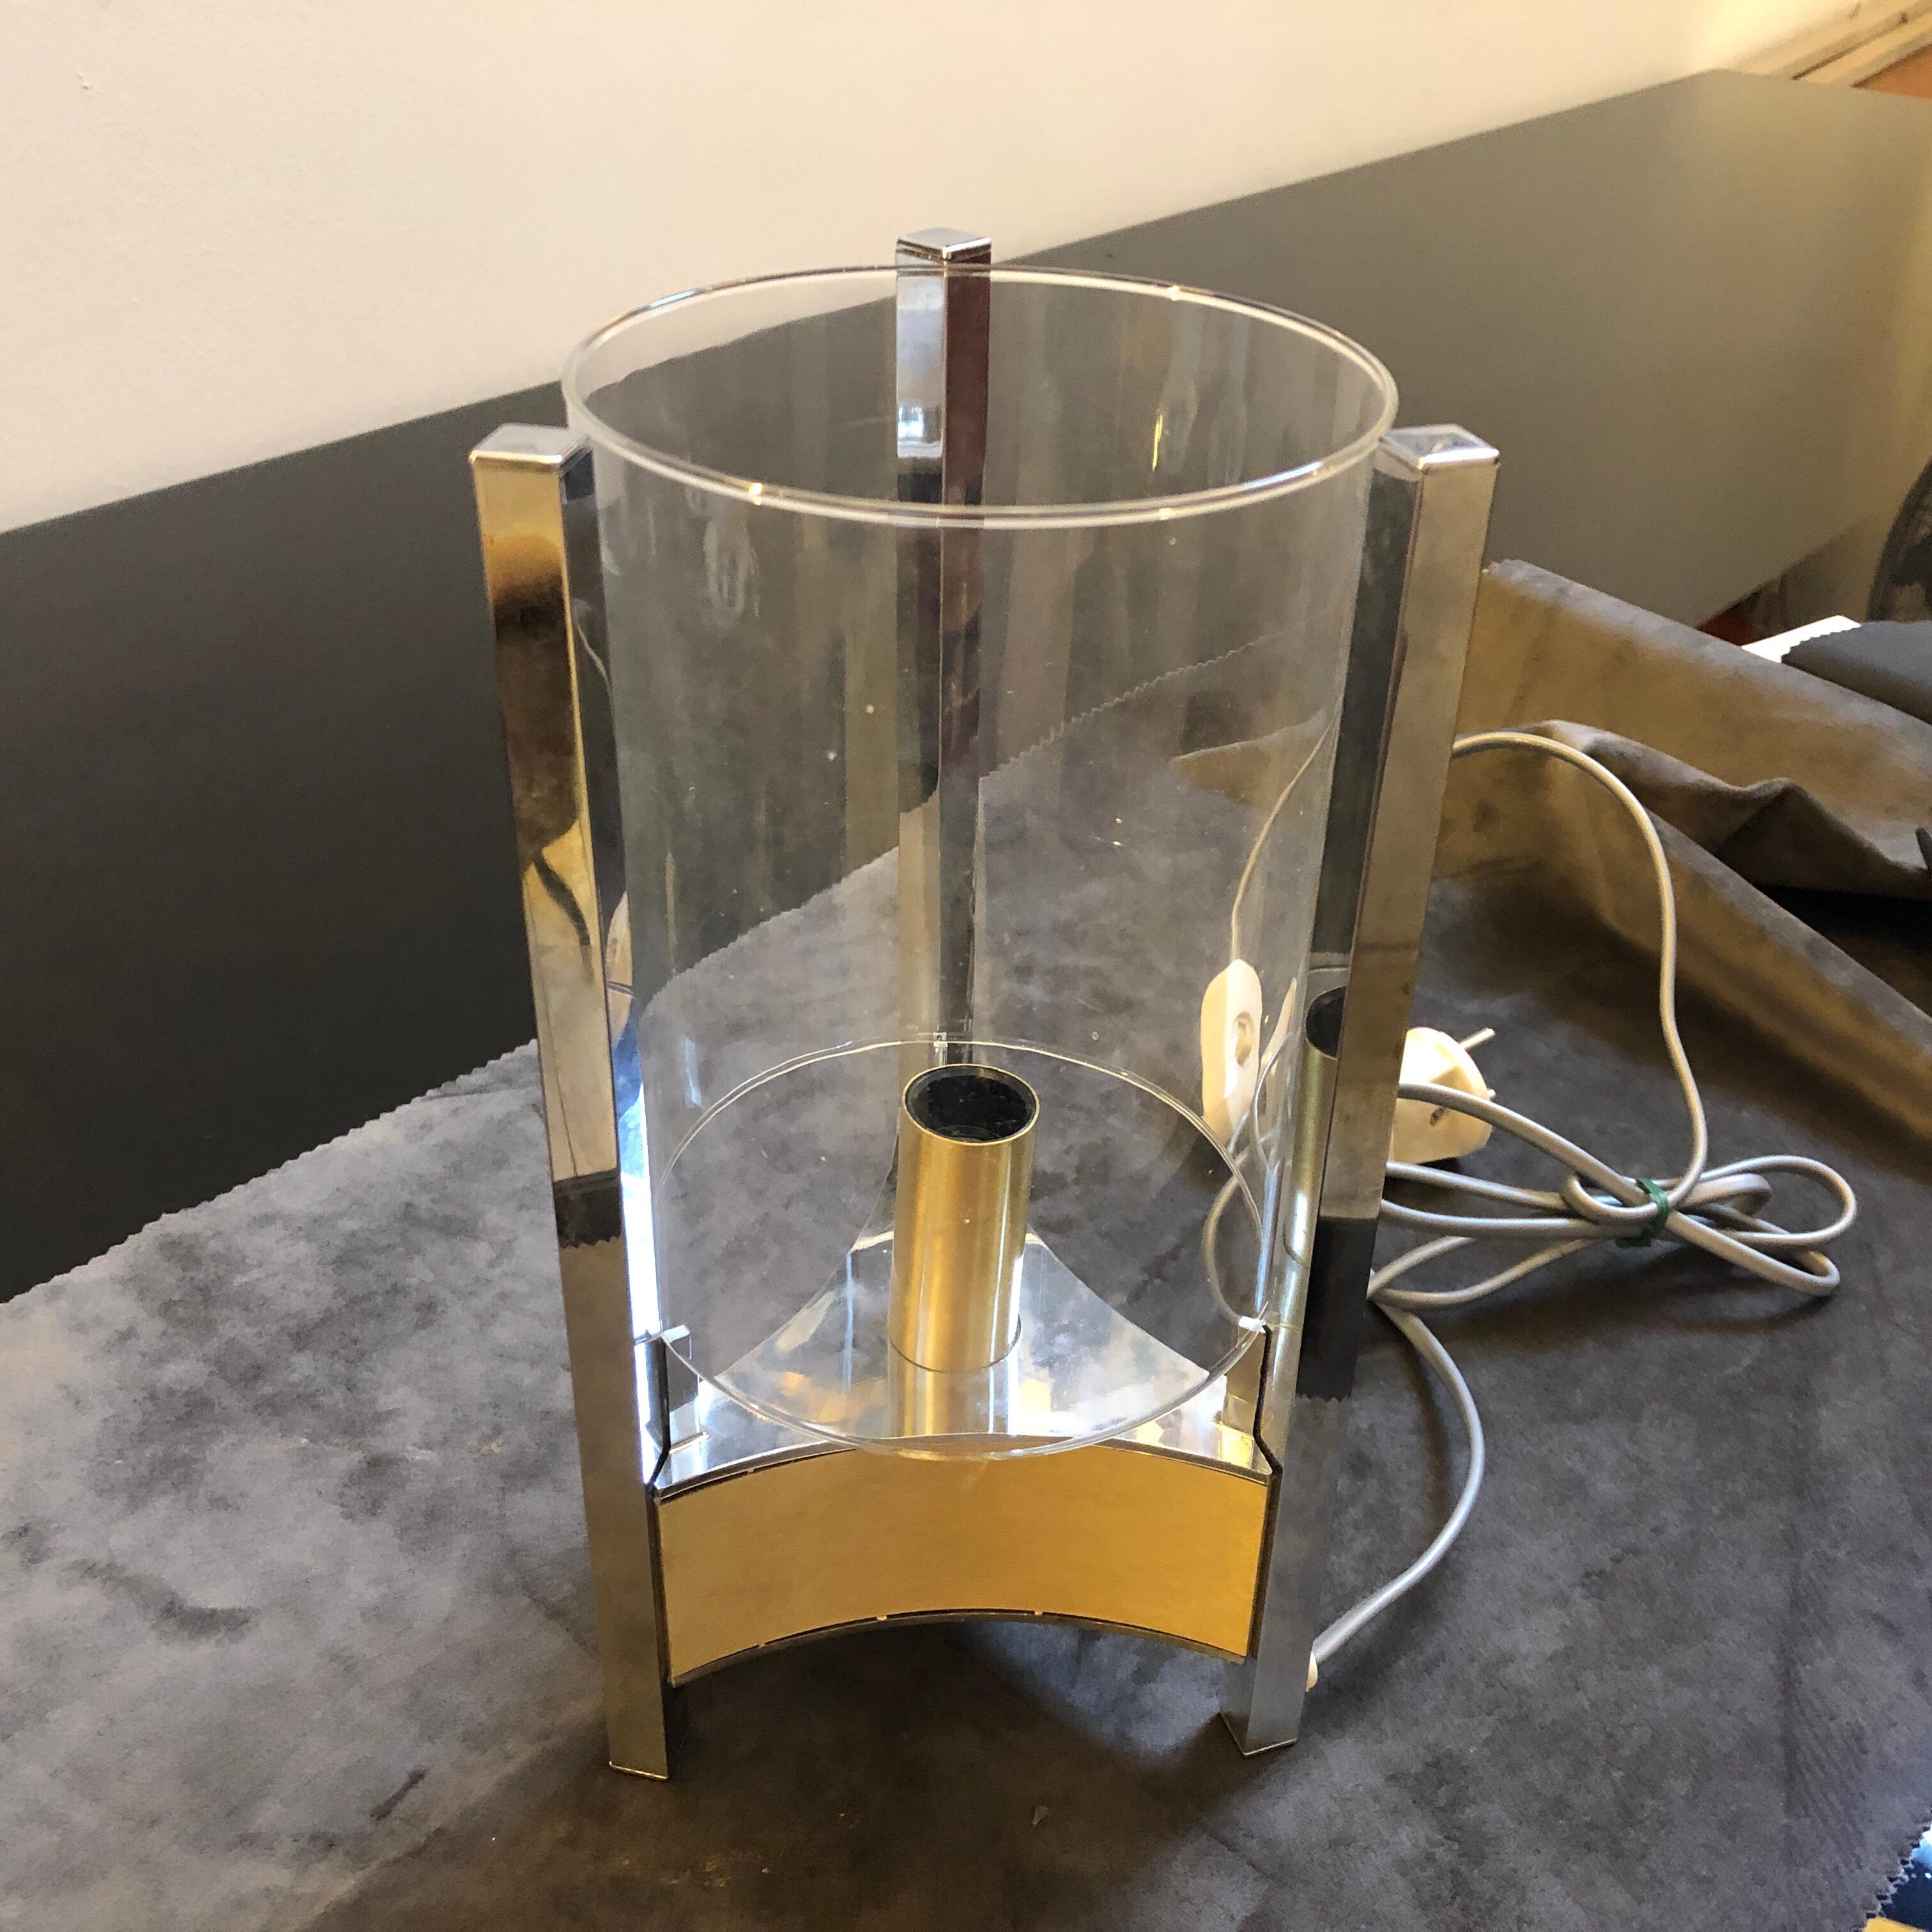 A rare table lamp designed by Gaetano Sciolari and manufactured by Sciolari Lighting in Rome. It's in chrome brass and glass, all parts are in perfect conditions. It's labeled Sciolari on the bottom, it works both 110-240 volts and it needs regular